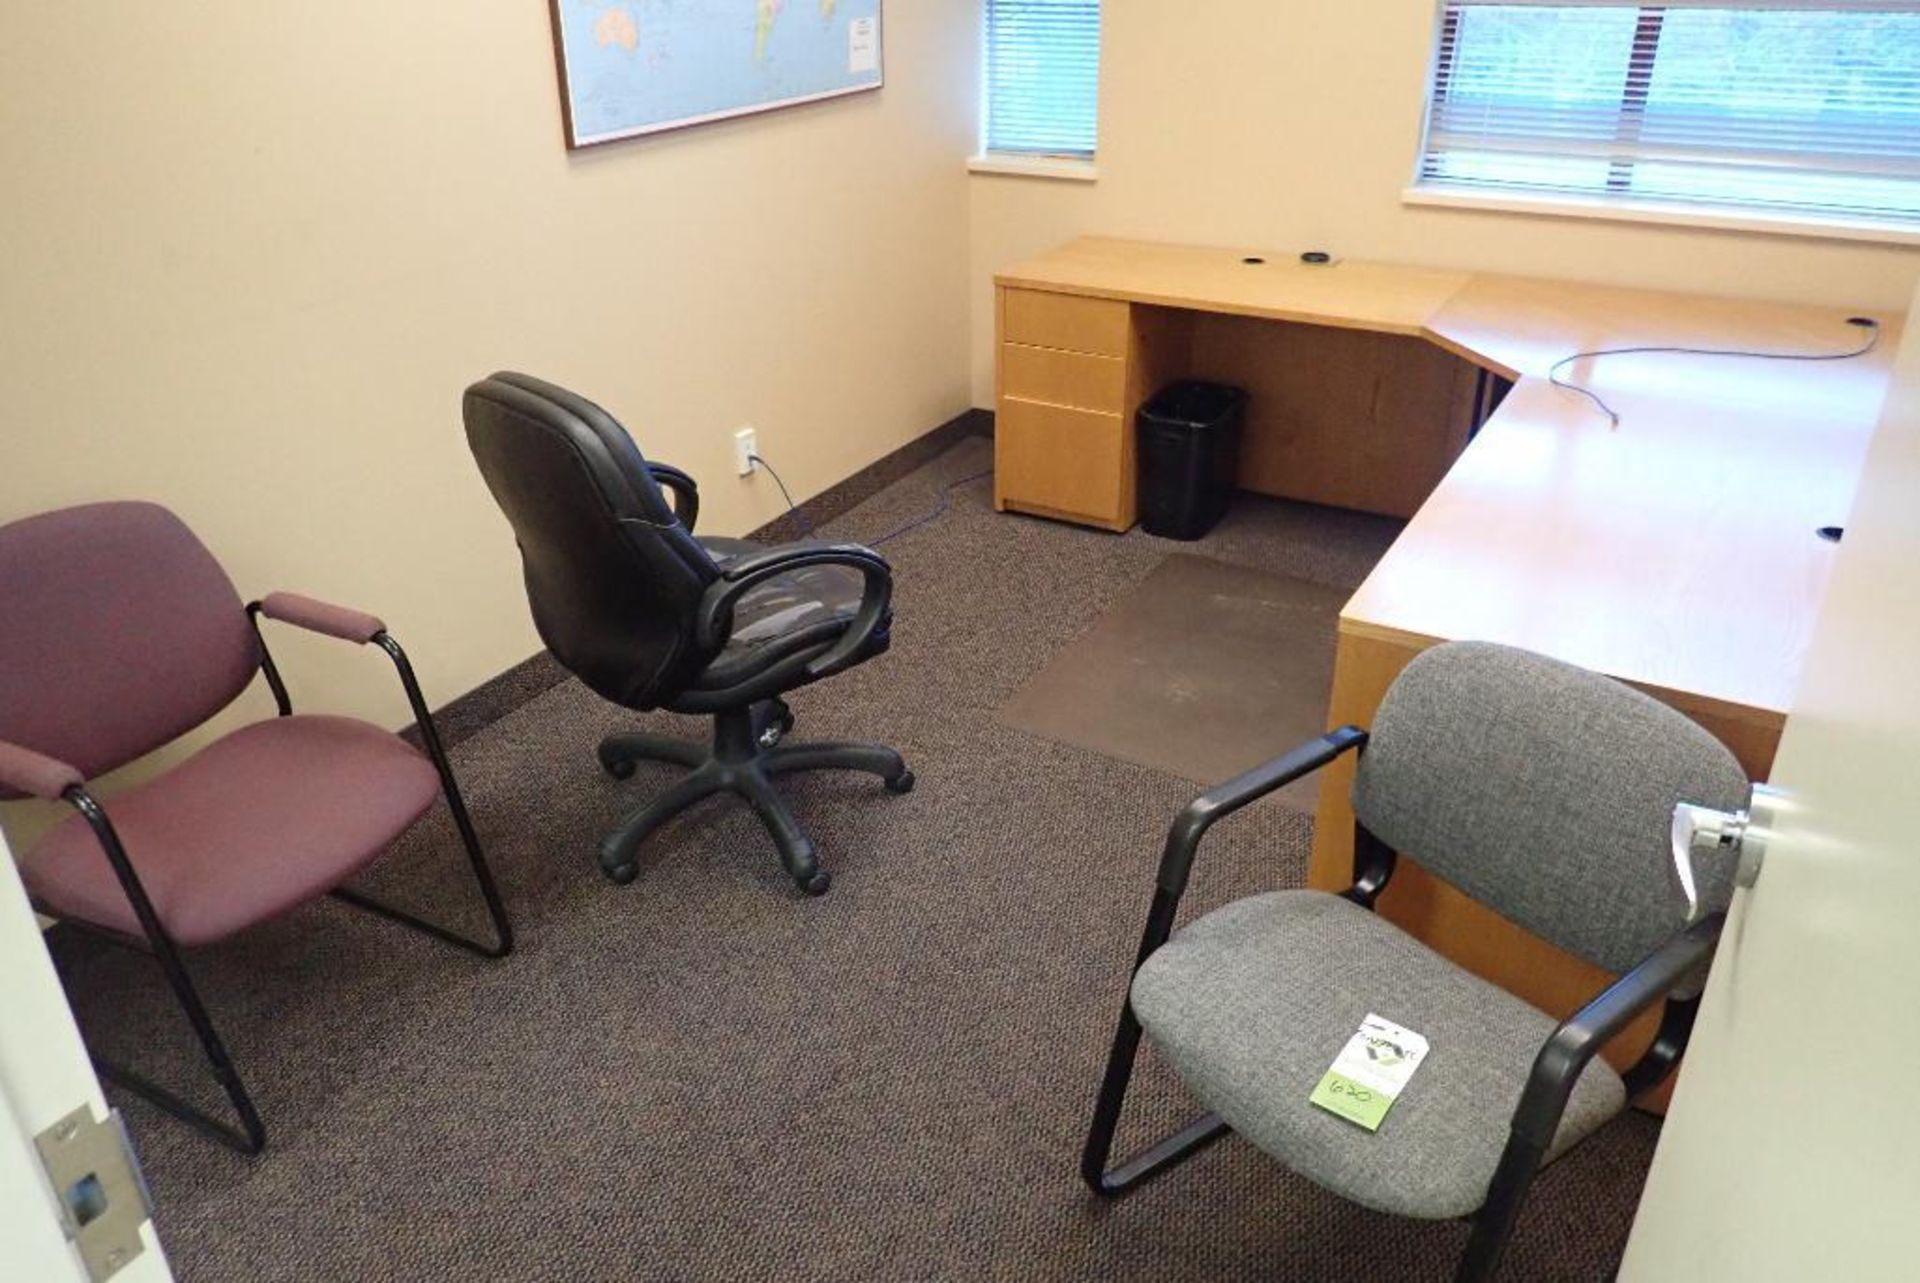 Contents of office, desk, chairs, map. **Rigging Fee: $100** (Located in Delta, BC Canada.)